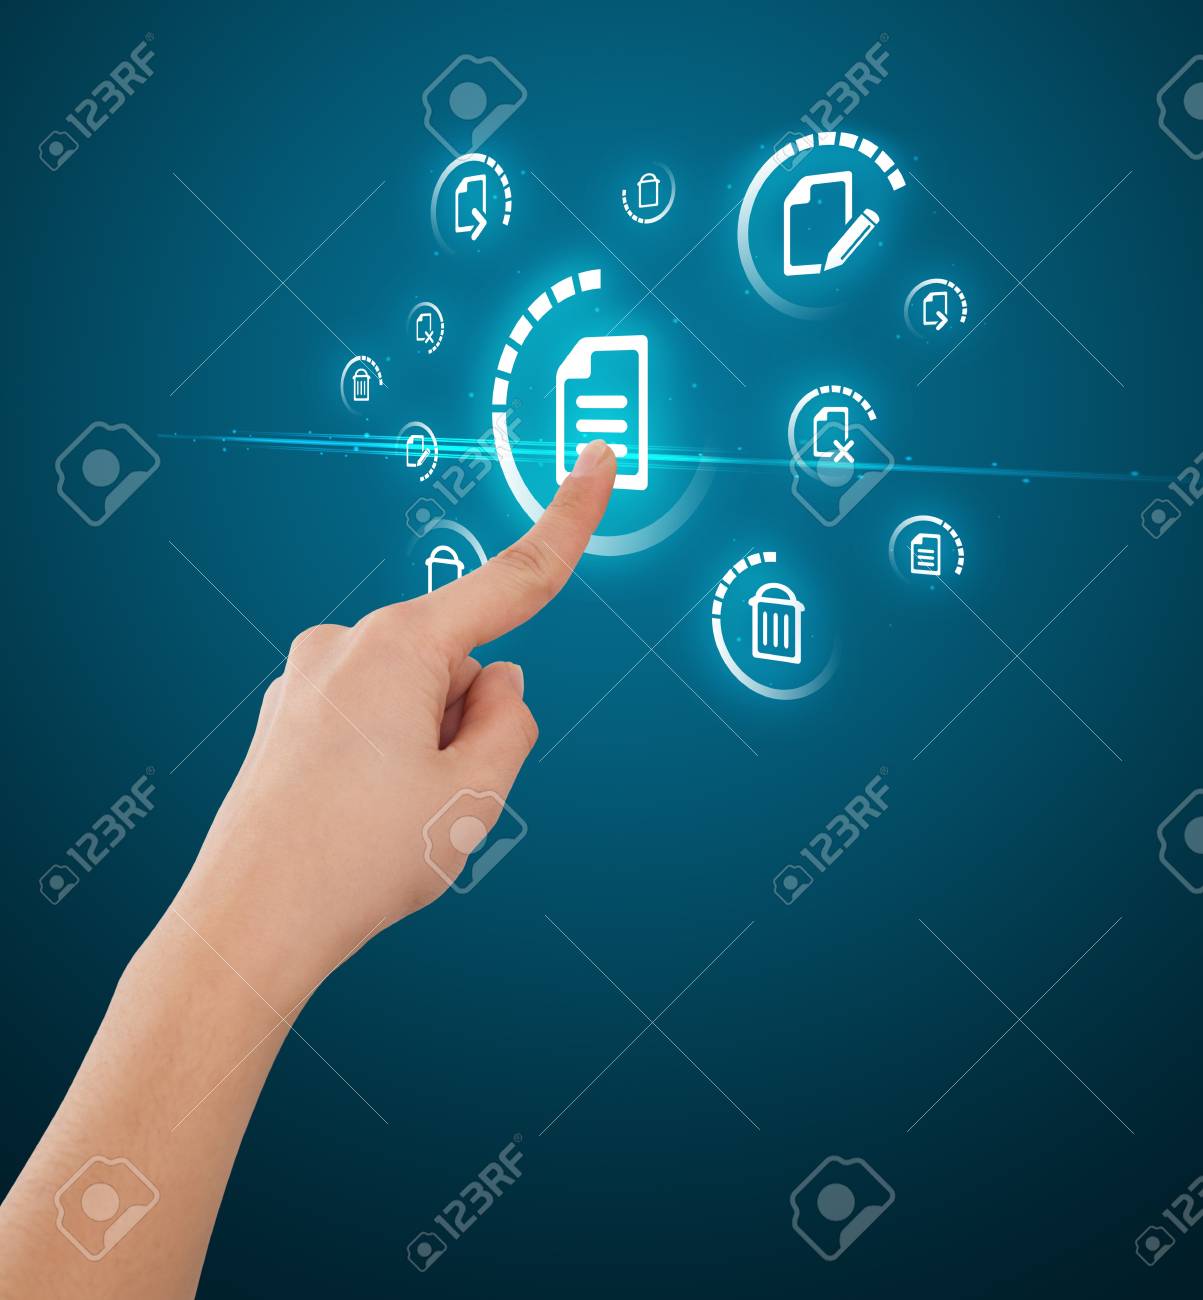 Businessman Pressing Messaging Type Of Modern Icons With Virtual